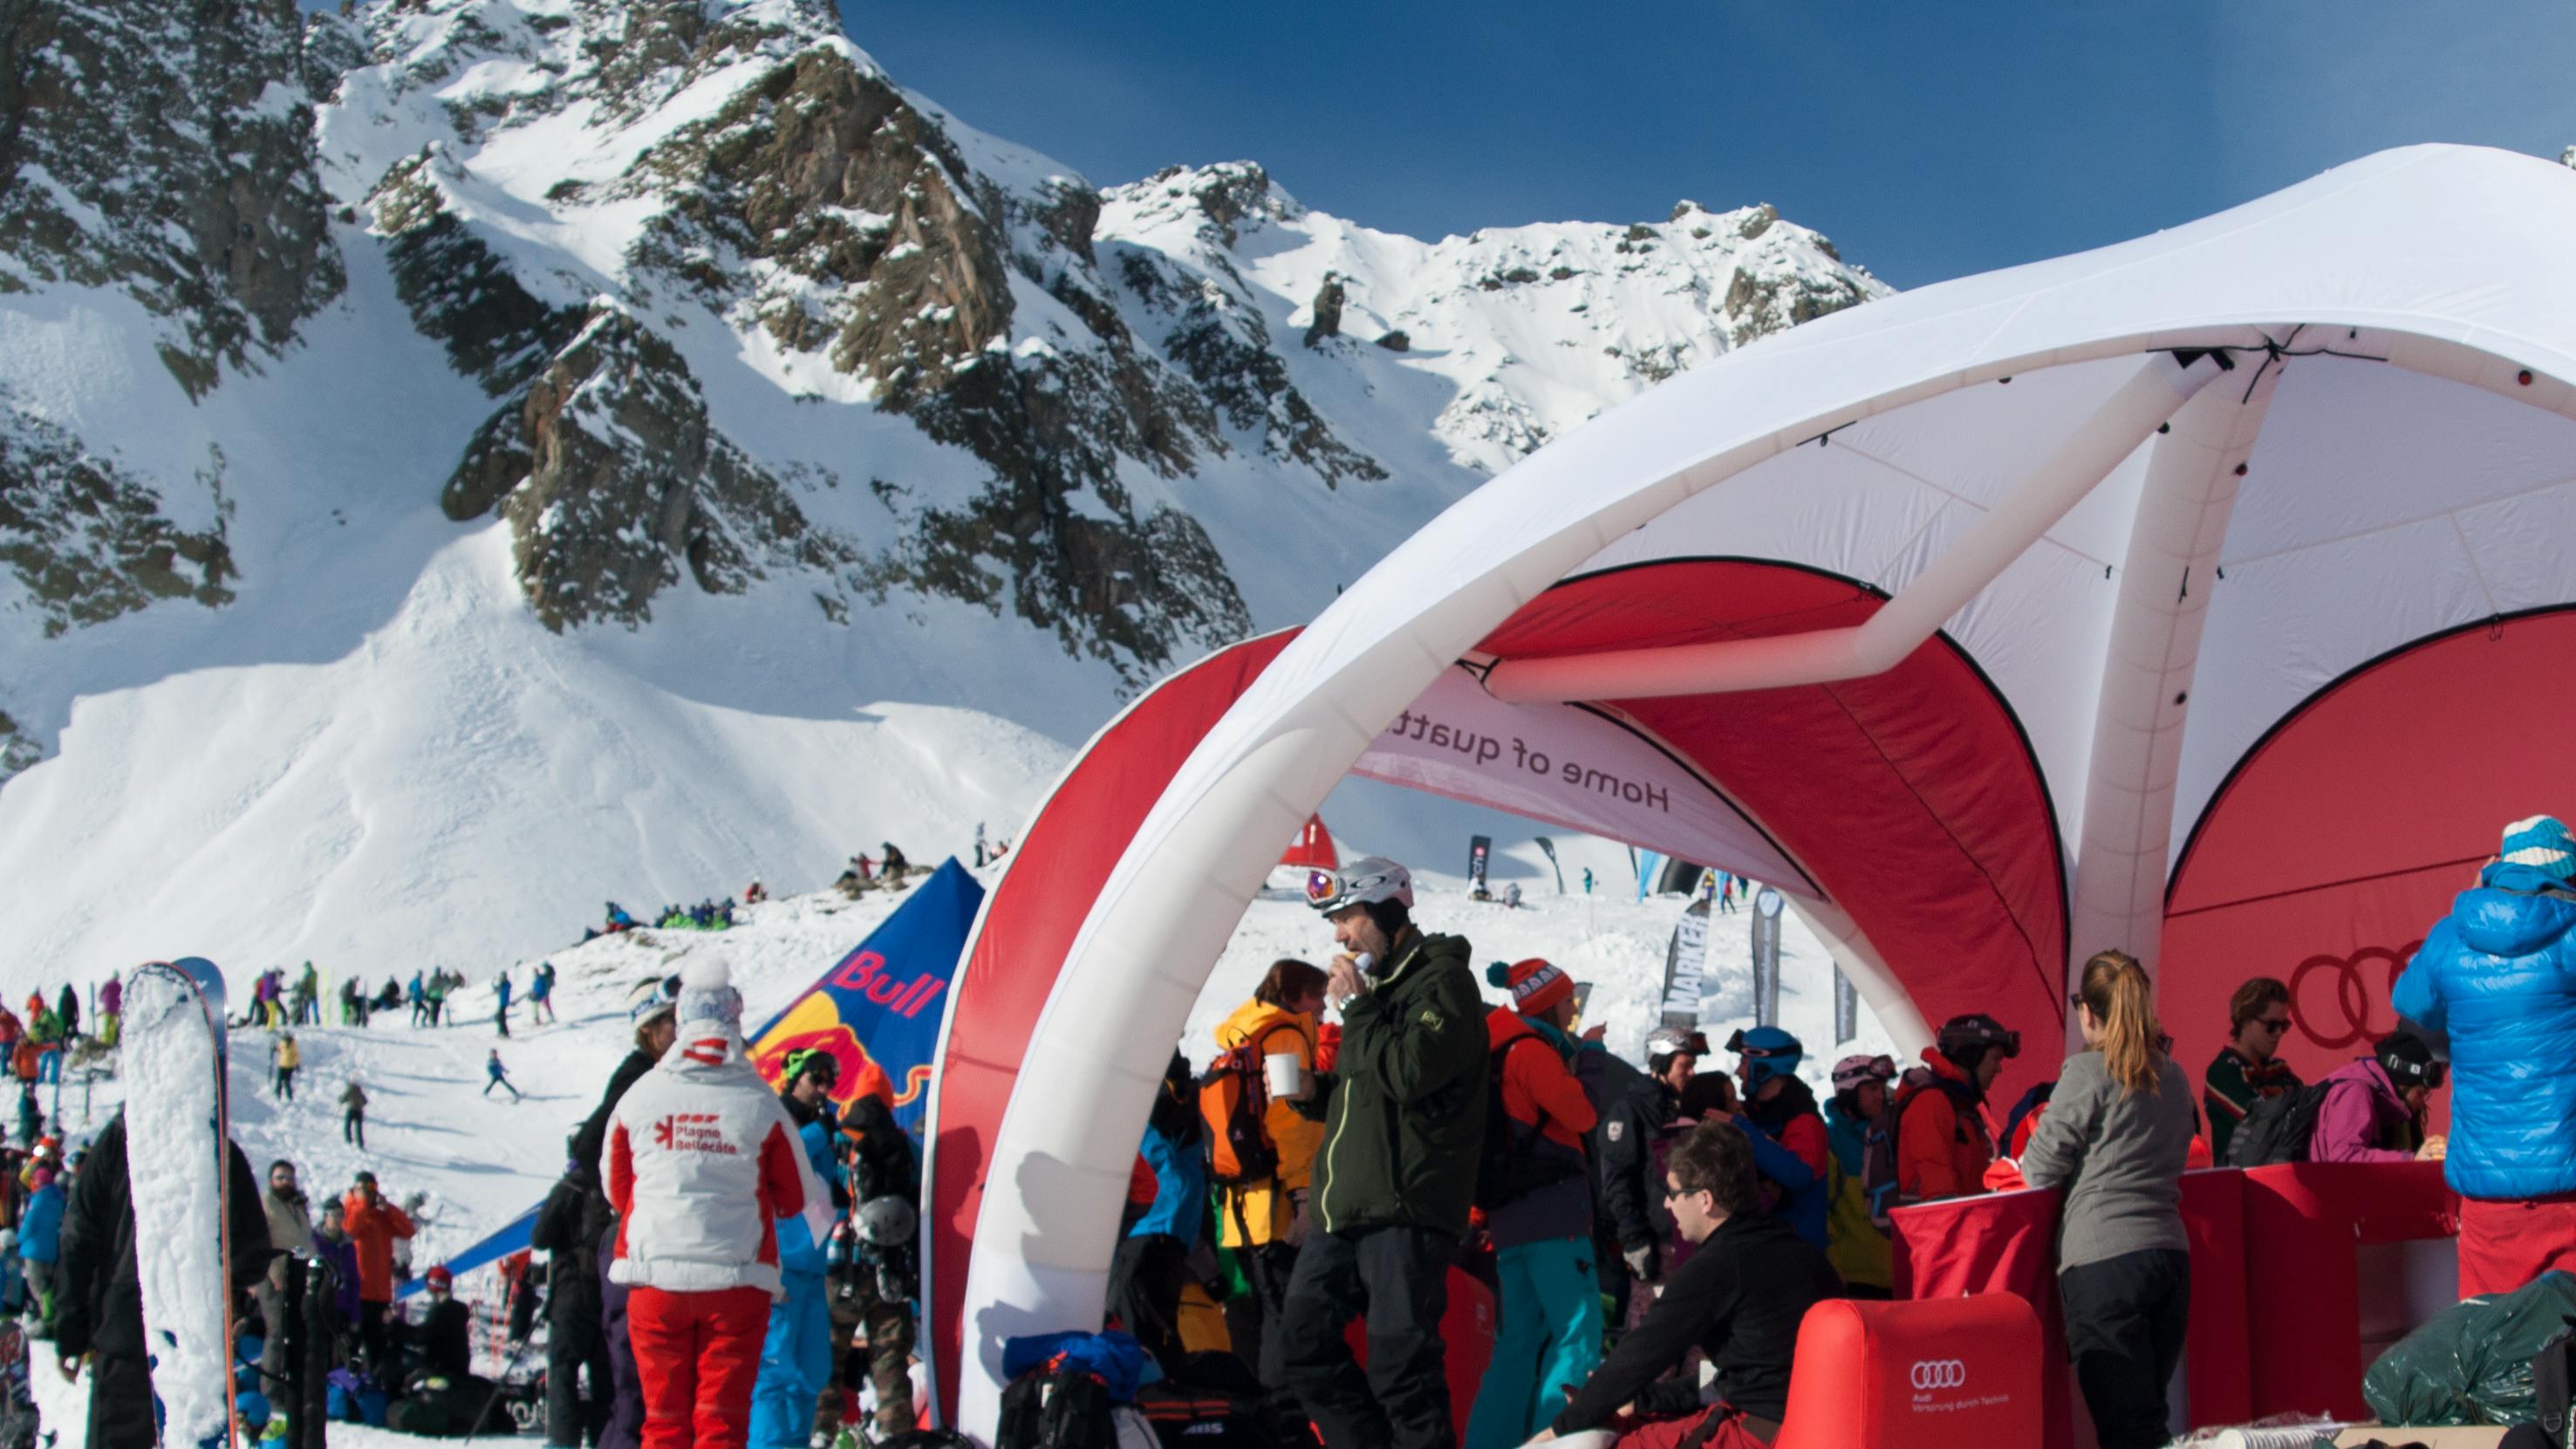 An Audi stand is set up on the snowy mountain for the Freeride World Tour. Skis stand upright in the snow and people mill about. 